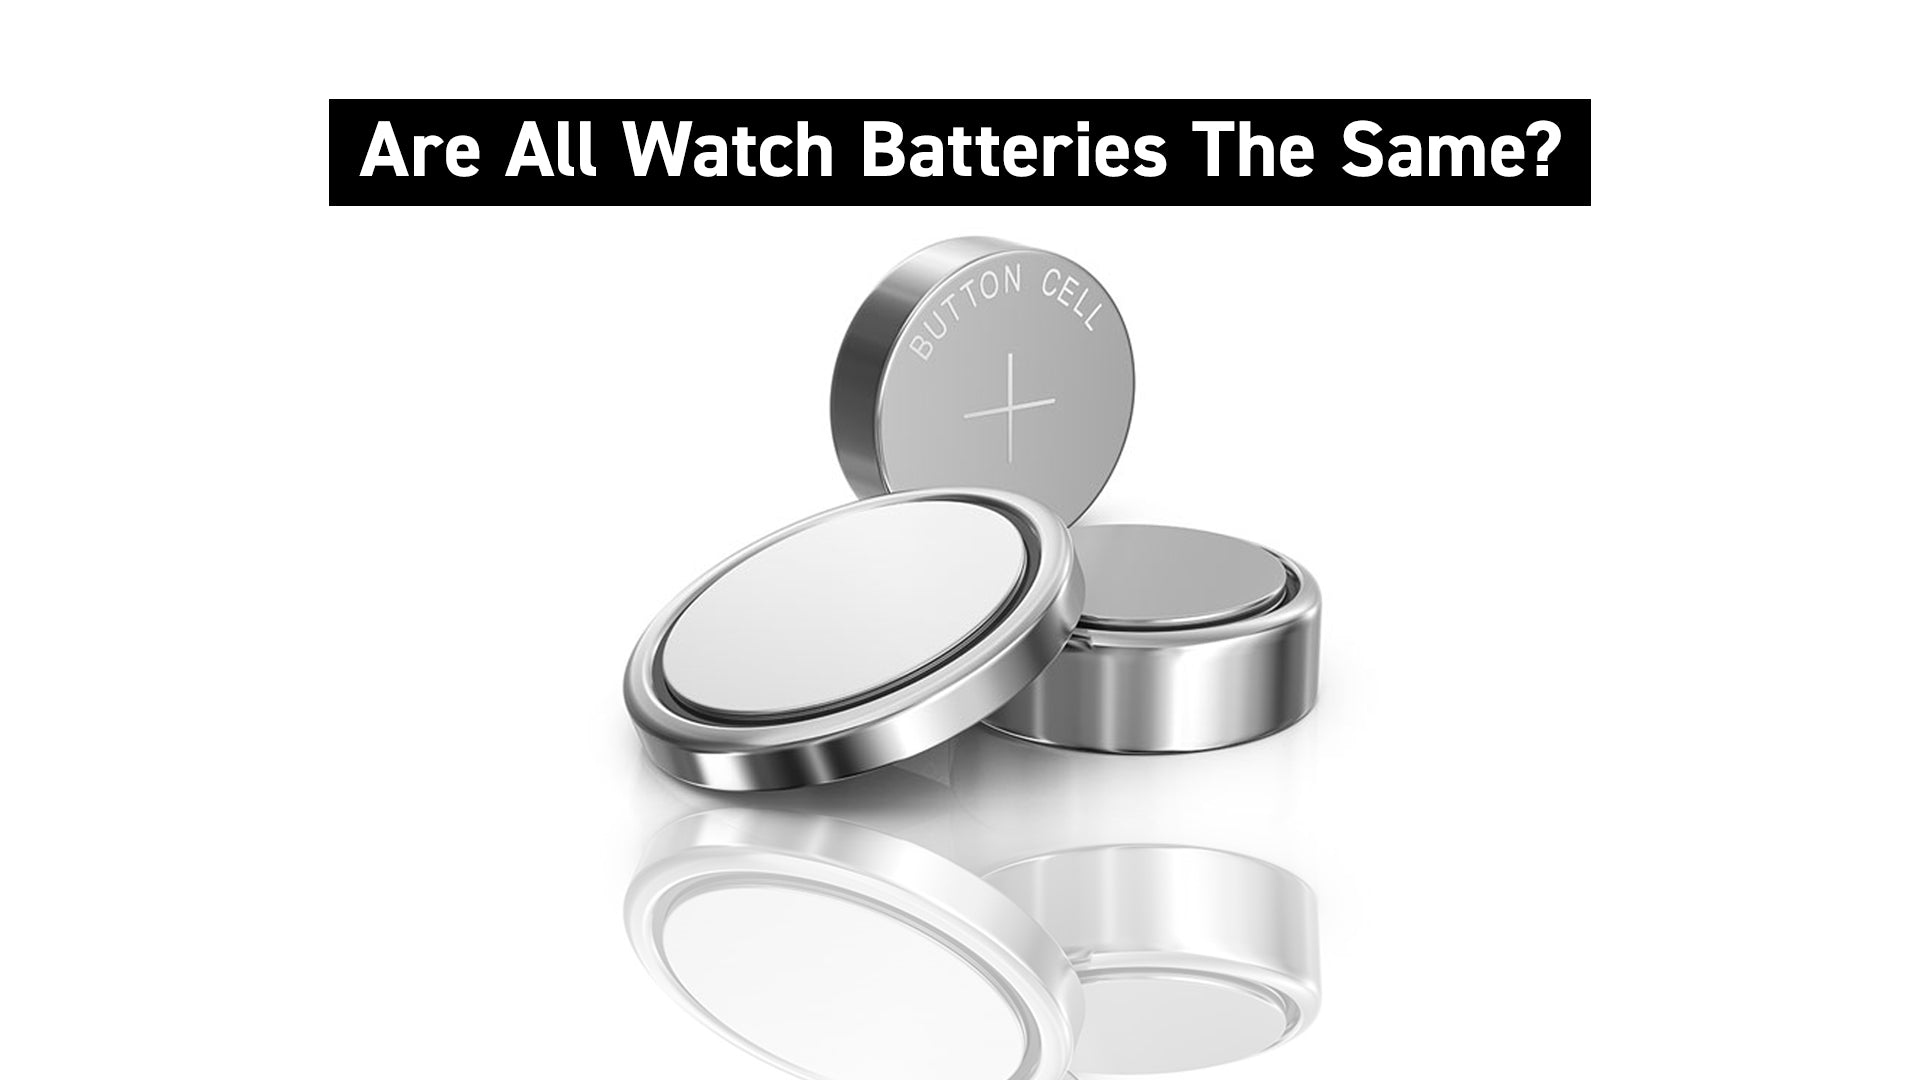 Are Watch Batteries All The Same?